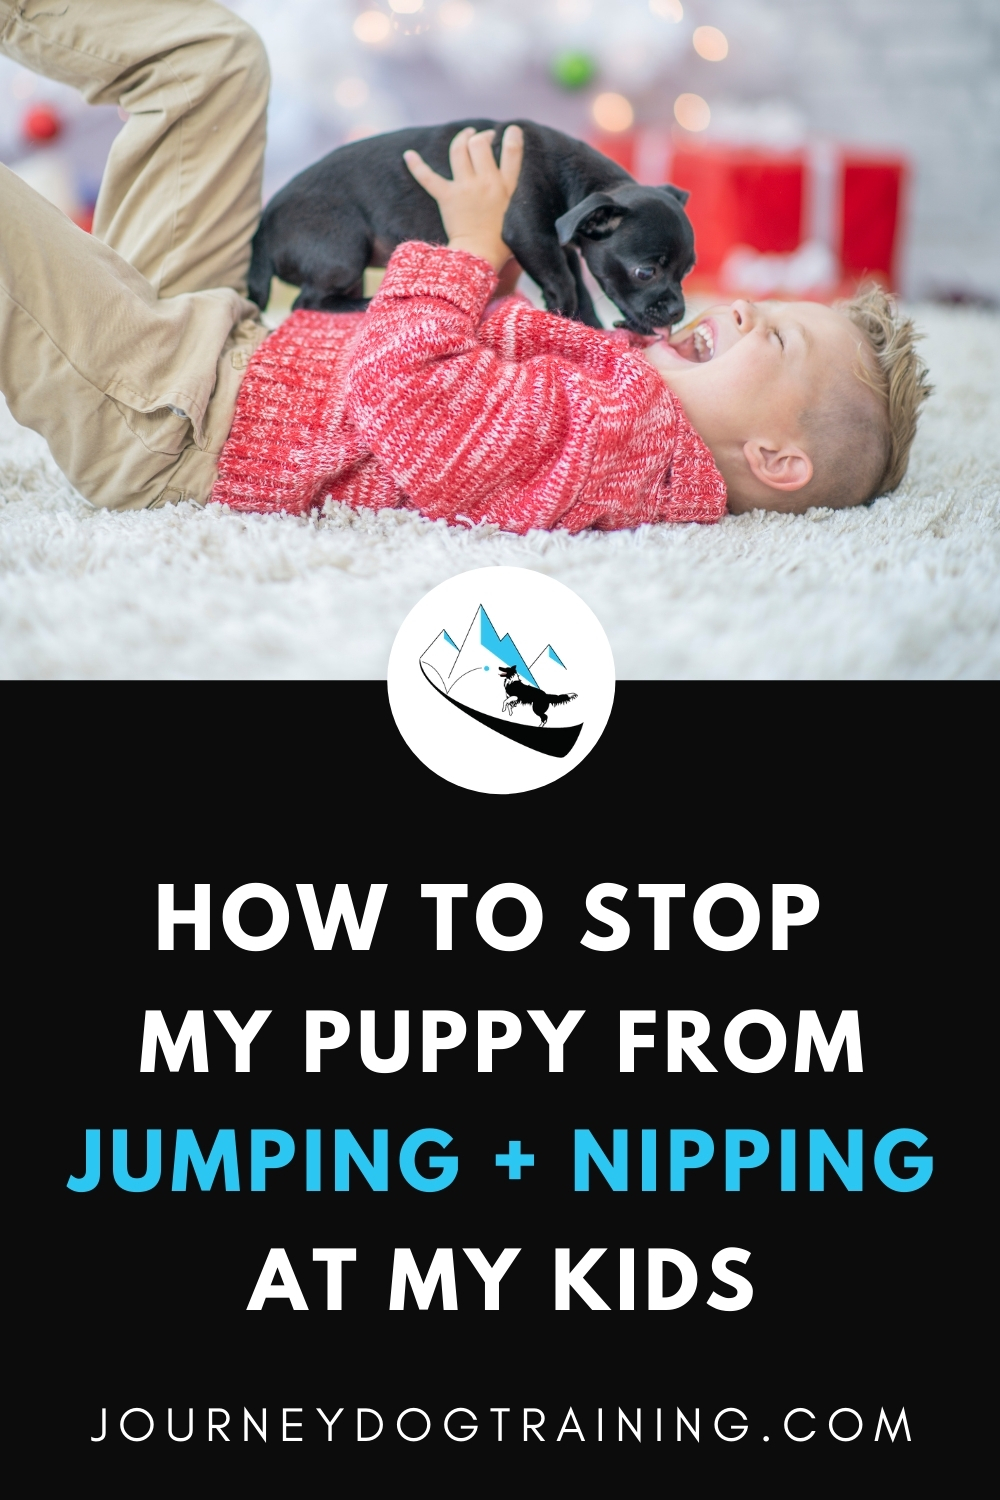 How to stop my puppy from jumping + nipping at my kids. This is a two-fold problem: teaching the baby puppy to be a bit more polite, and teaching your child how to interact with the puppy so that they both can have fun. https://journeydogtraining.com/my-child-is-scared-of-my-jumpy-bitey-puppy-now-what/